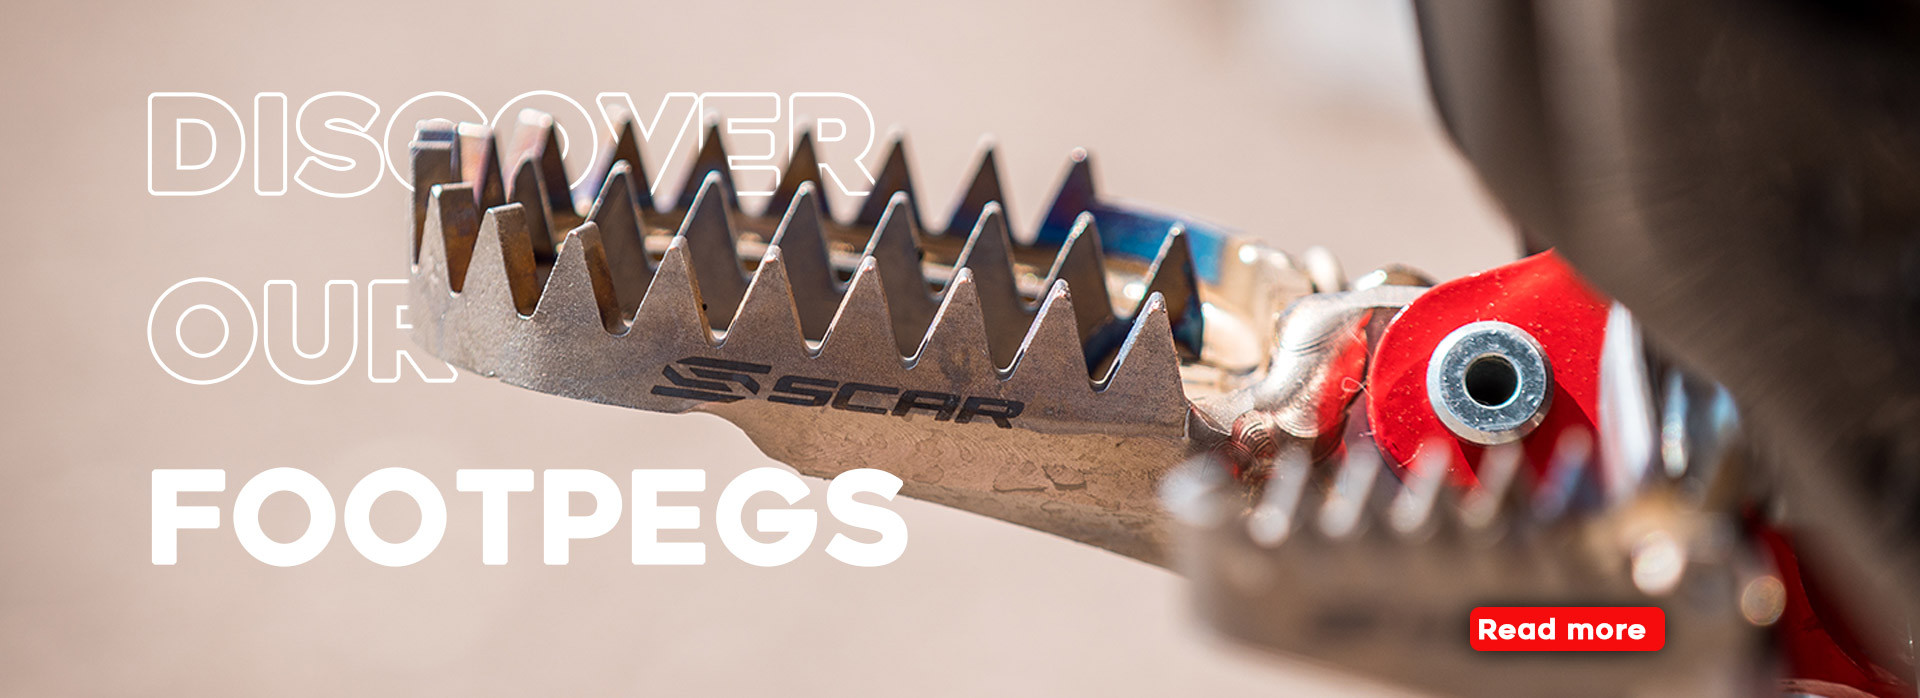 Discover our footpegs